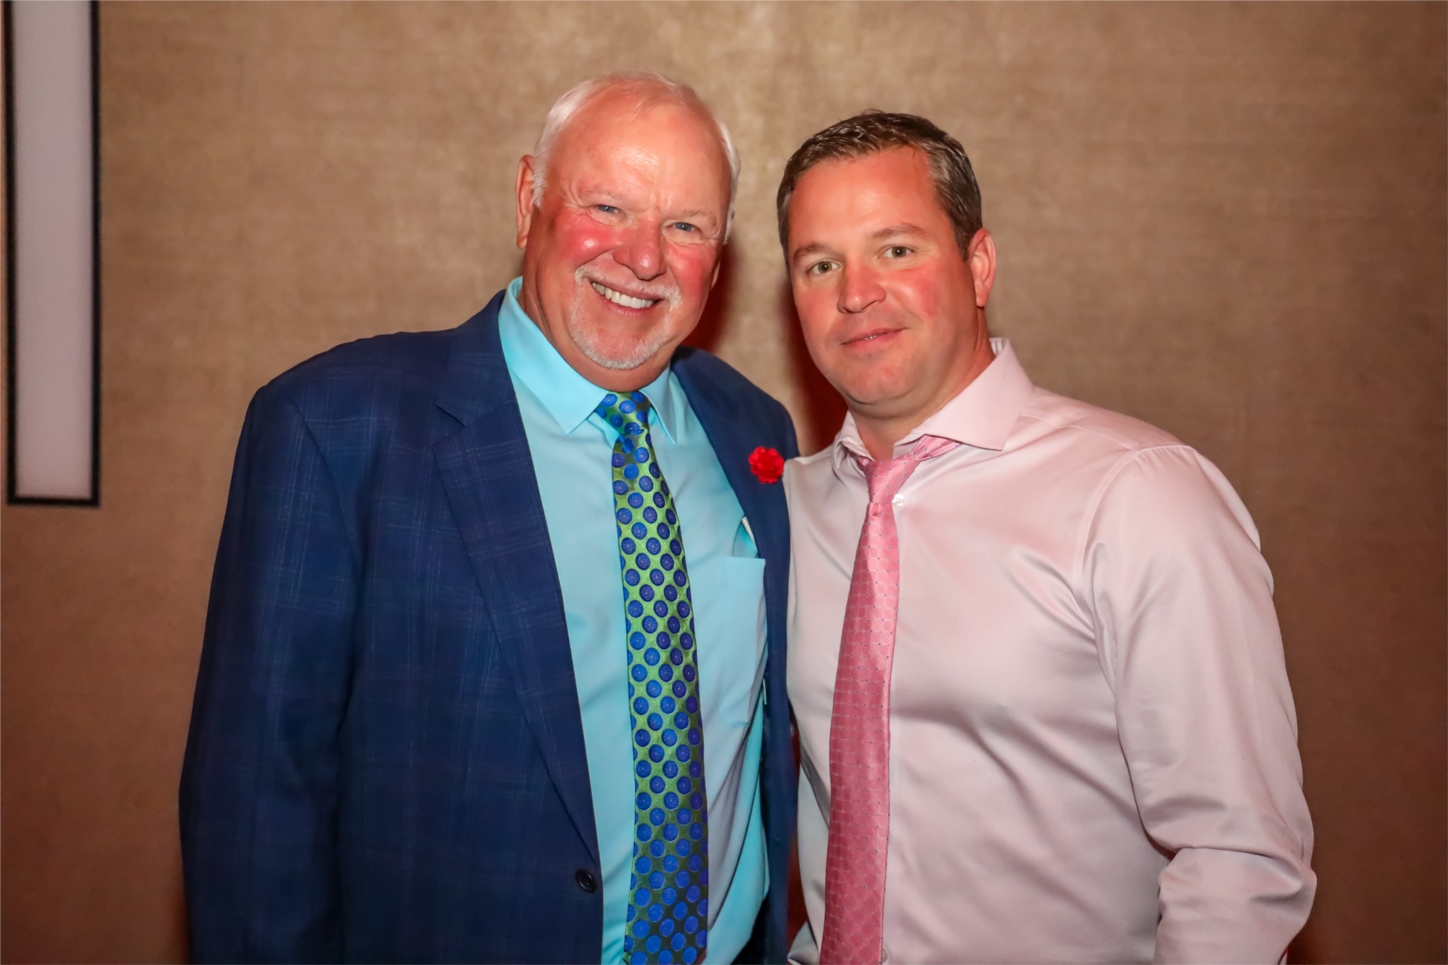 Founder and Chairman of the Board, Ken Corneau, with his son, President & CEO, Keith Corneau.